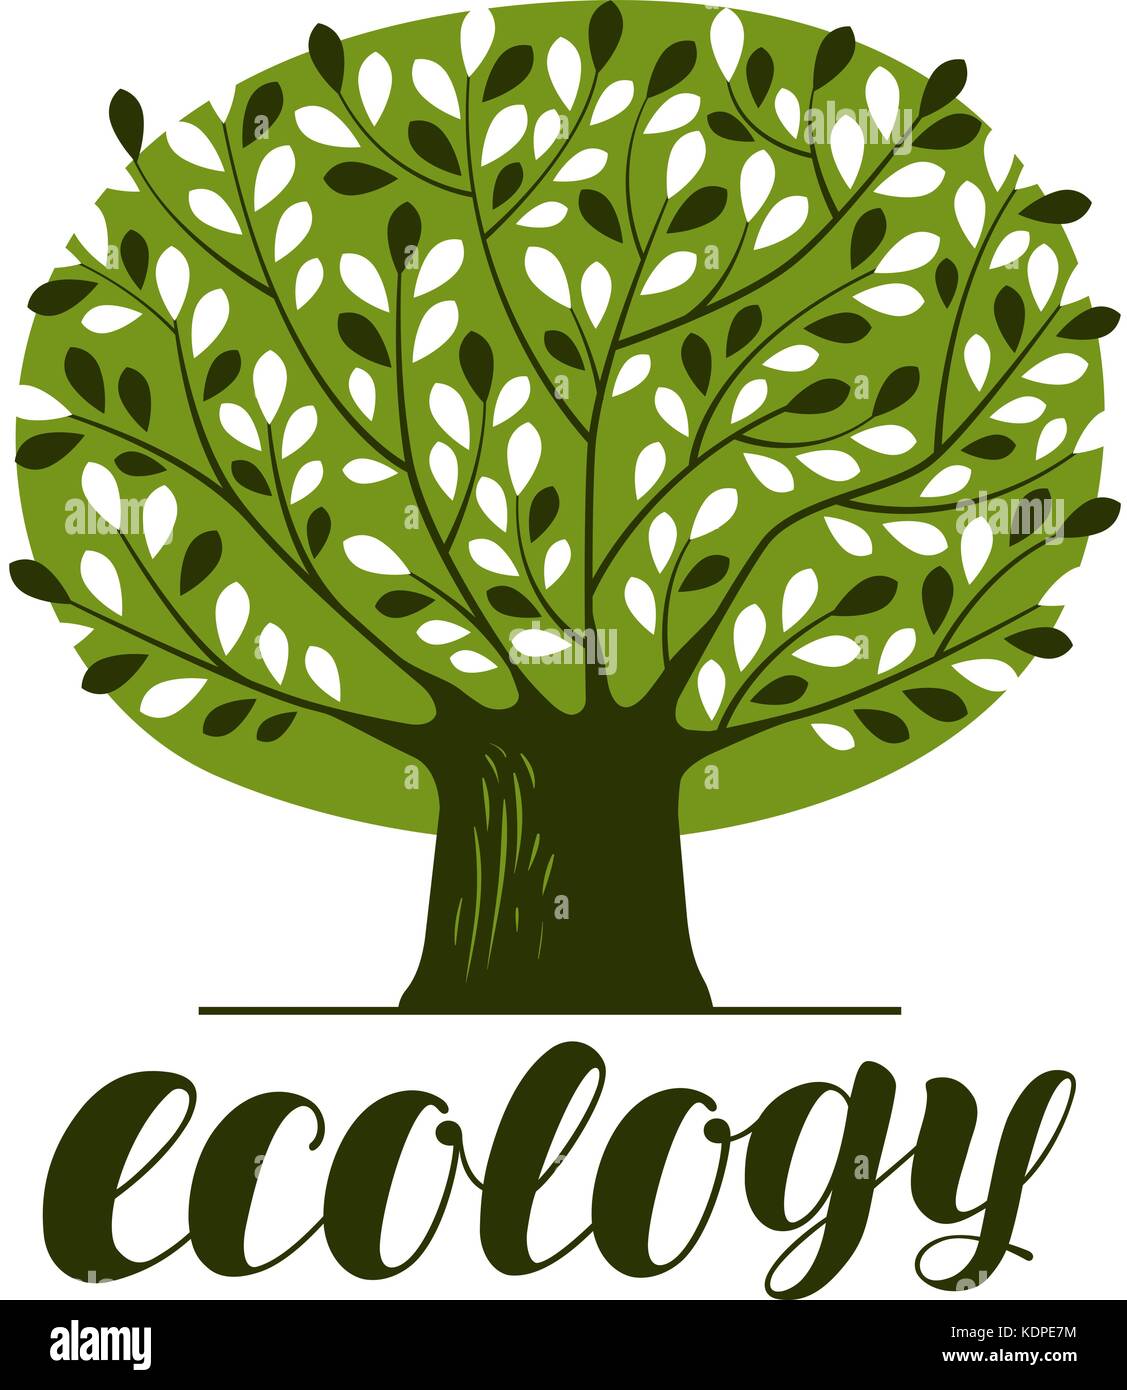 Nature, ecology, forest logo or label. Abstract green tree with leaves. Decorative vector illustration Stock Vector